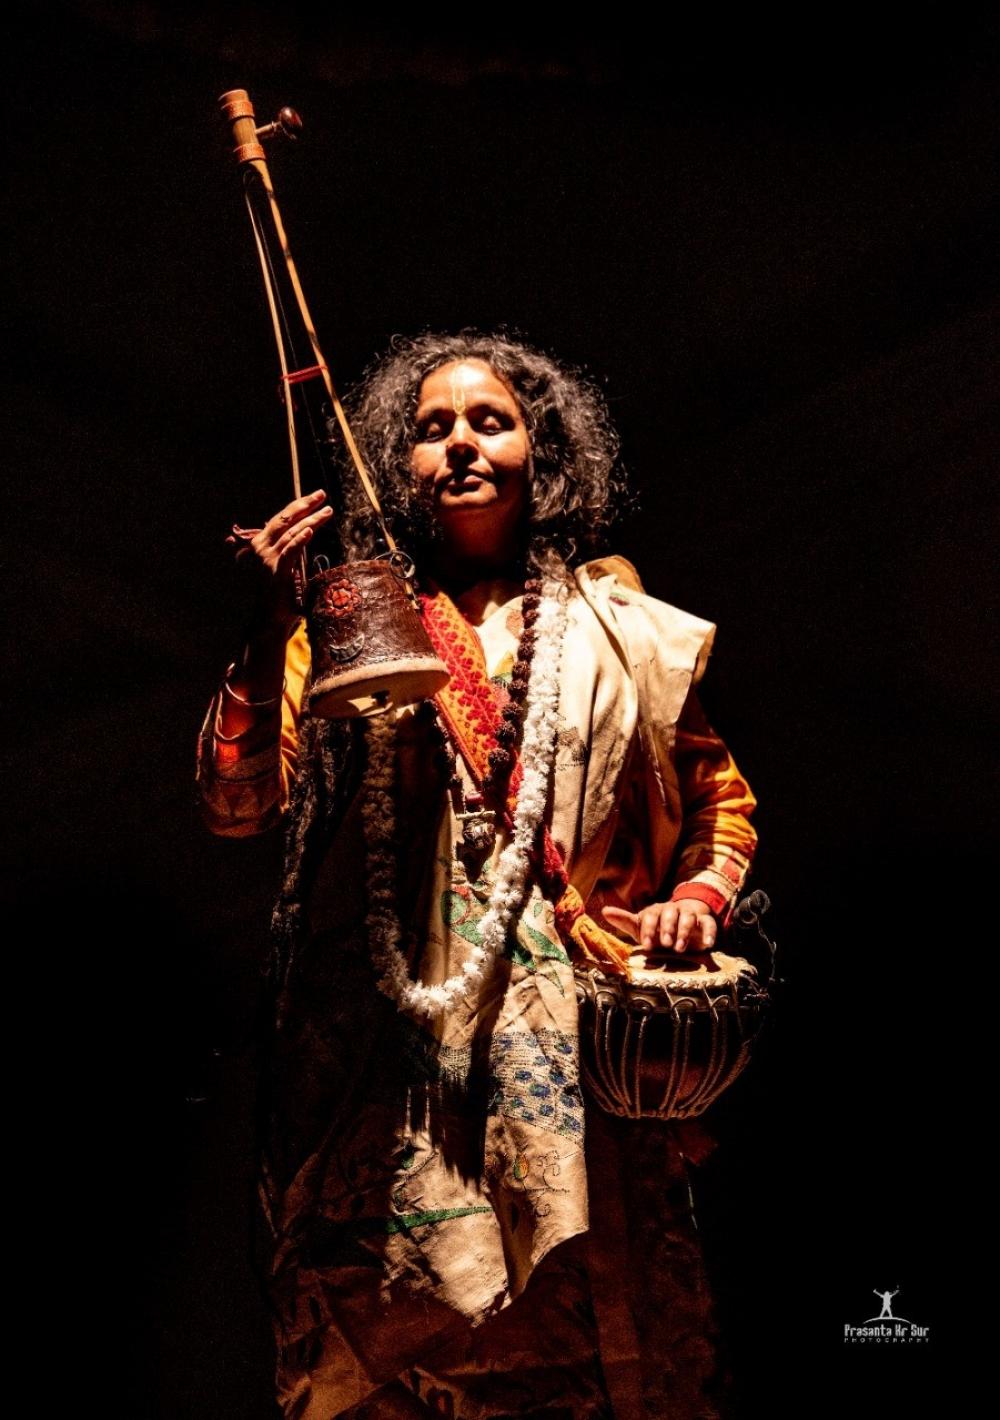 The Weekend Leader - Parvathy Baul and discovering oneself anew, everyday